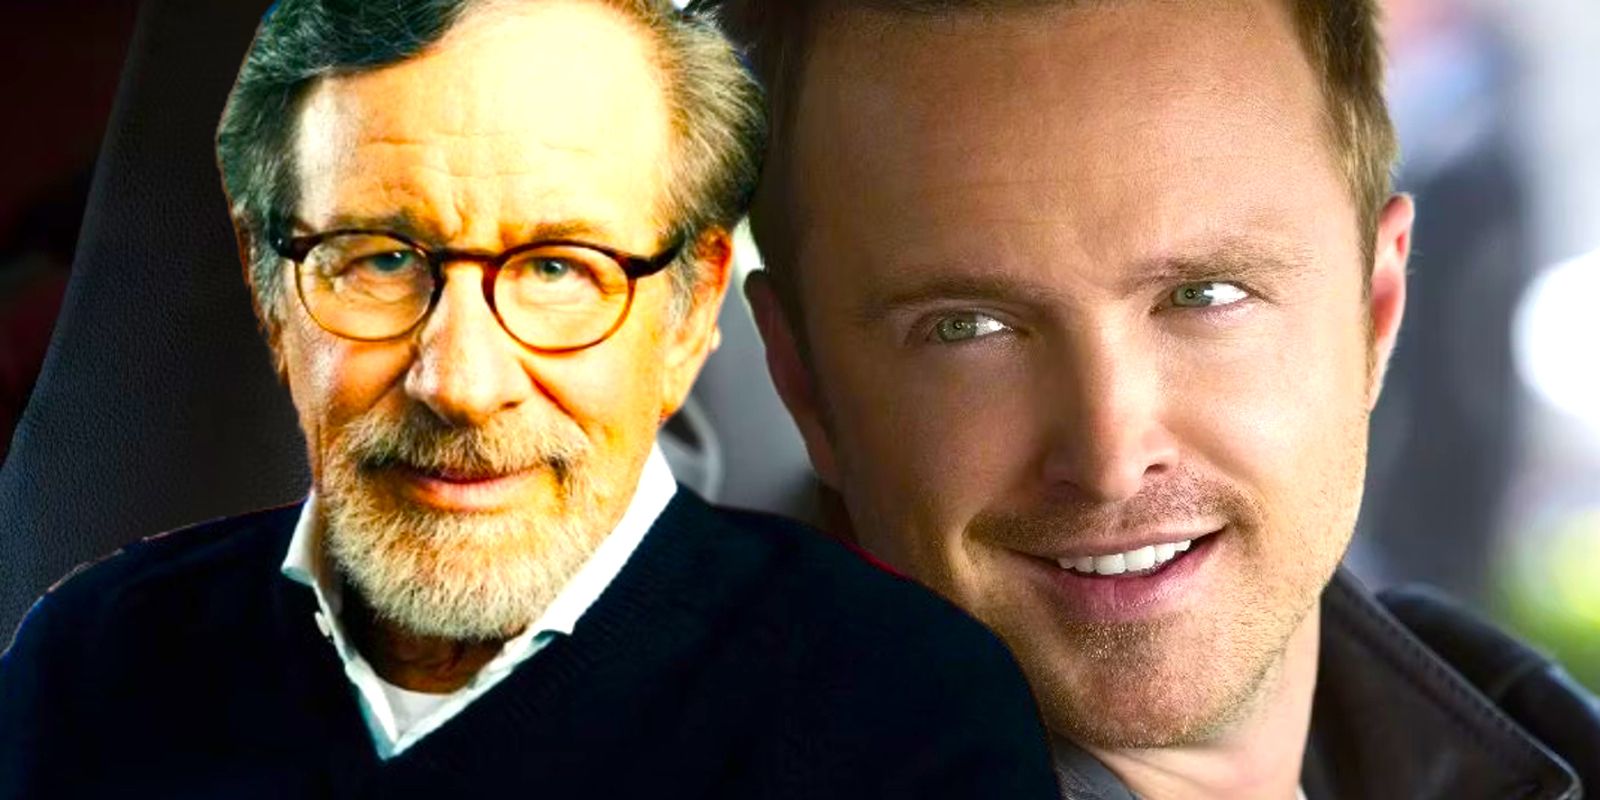 Custom image of Steven Spielberg looking forward and Aaron Paul looking off to the side in Need for Speed